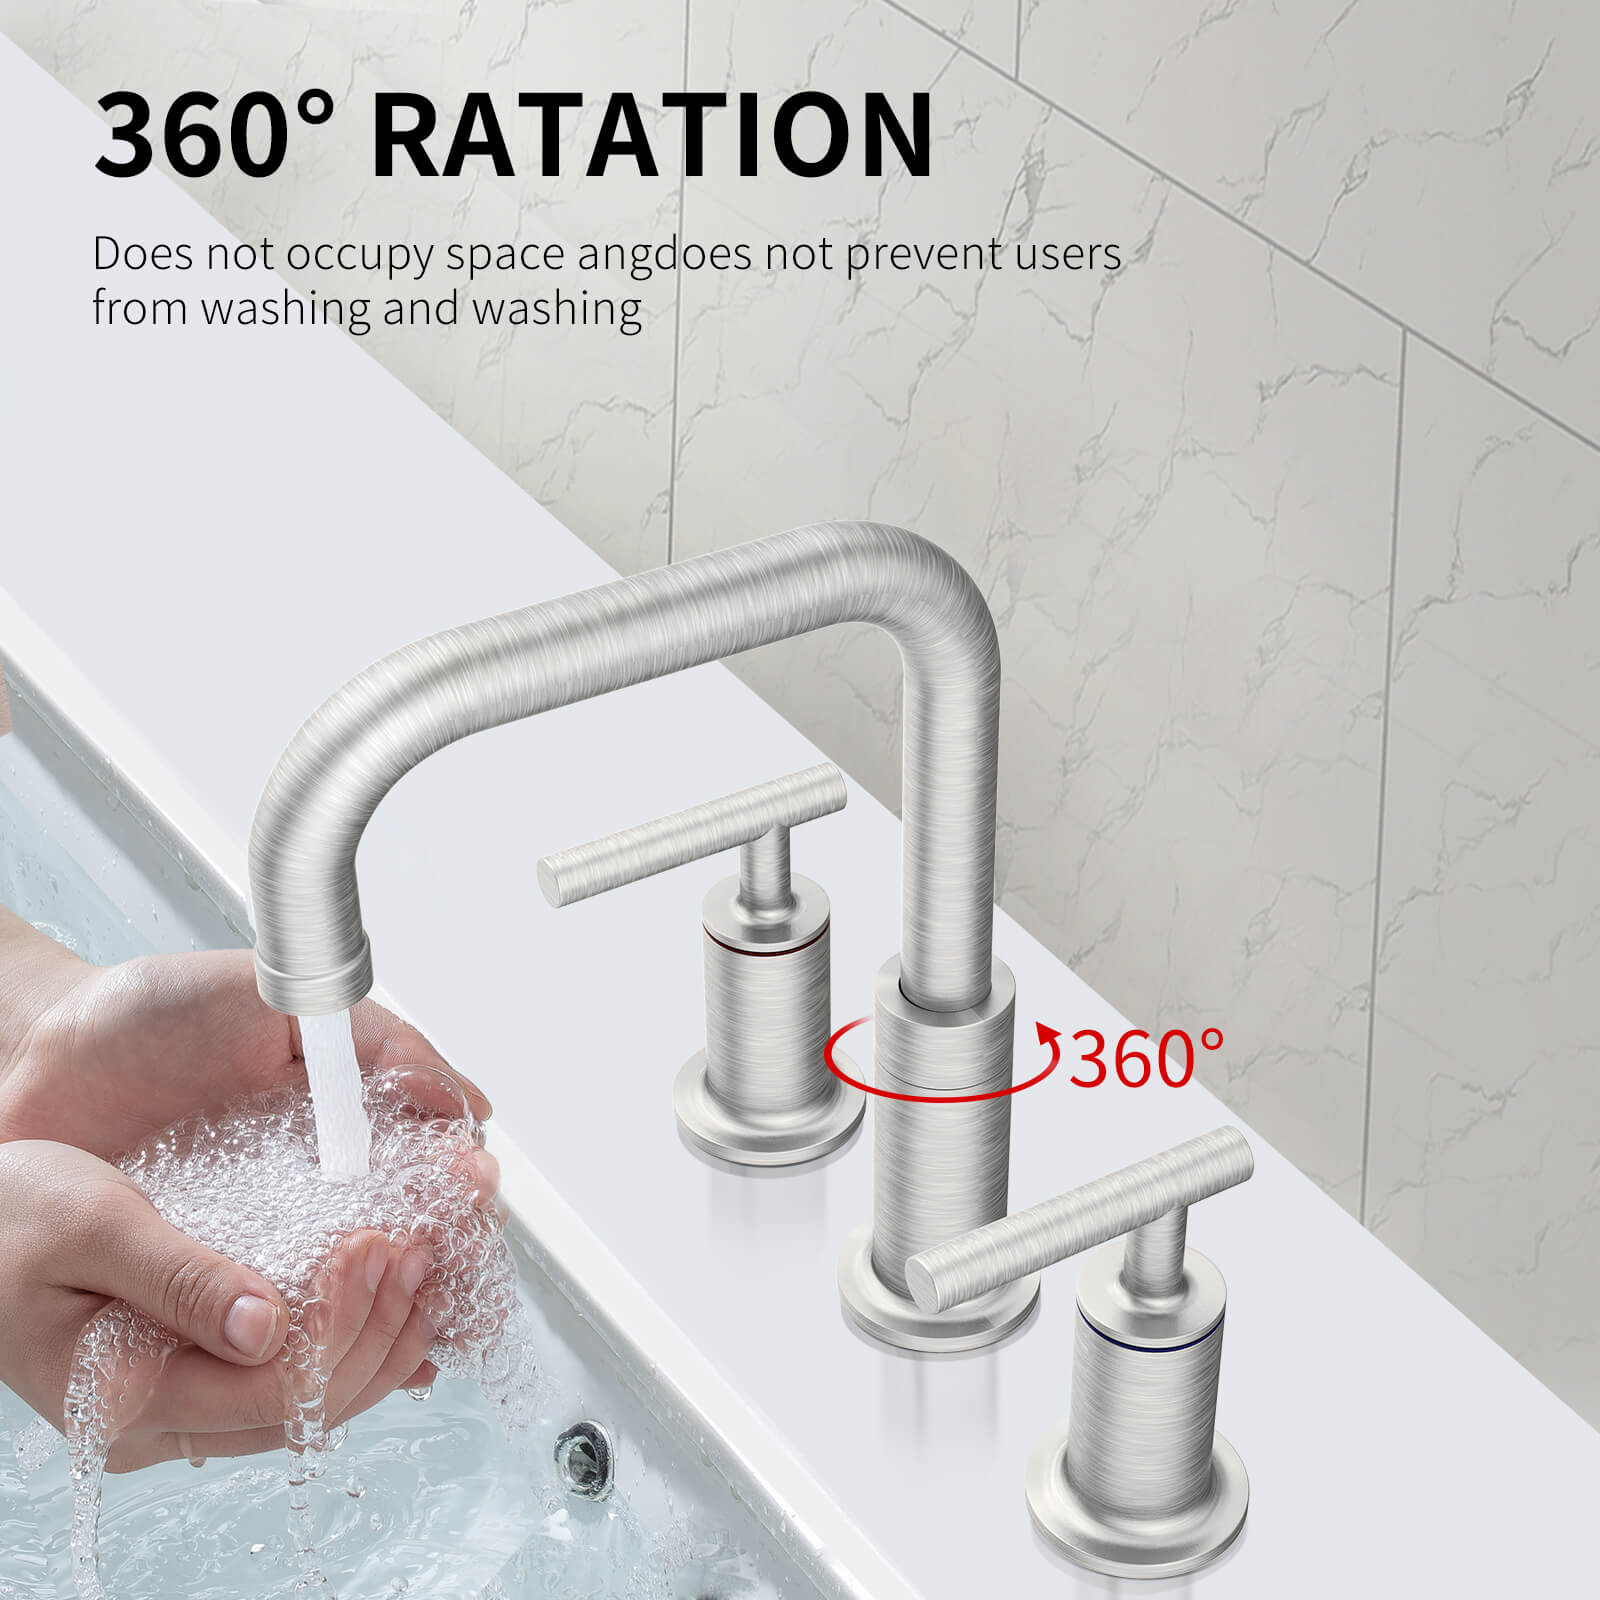 360 Degree Swivel Spout 2 Handles 8 Inch HOMELODY Bathroom Faucet with Pop Up Drain